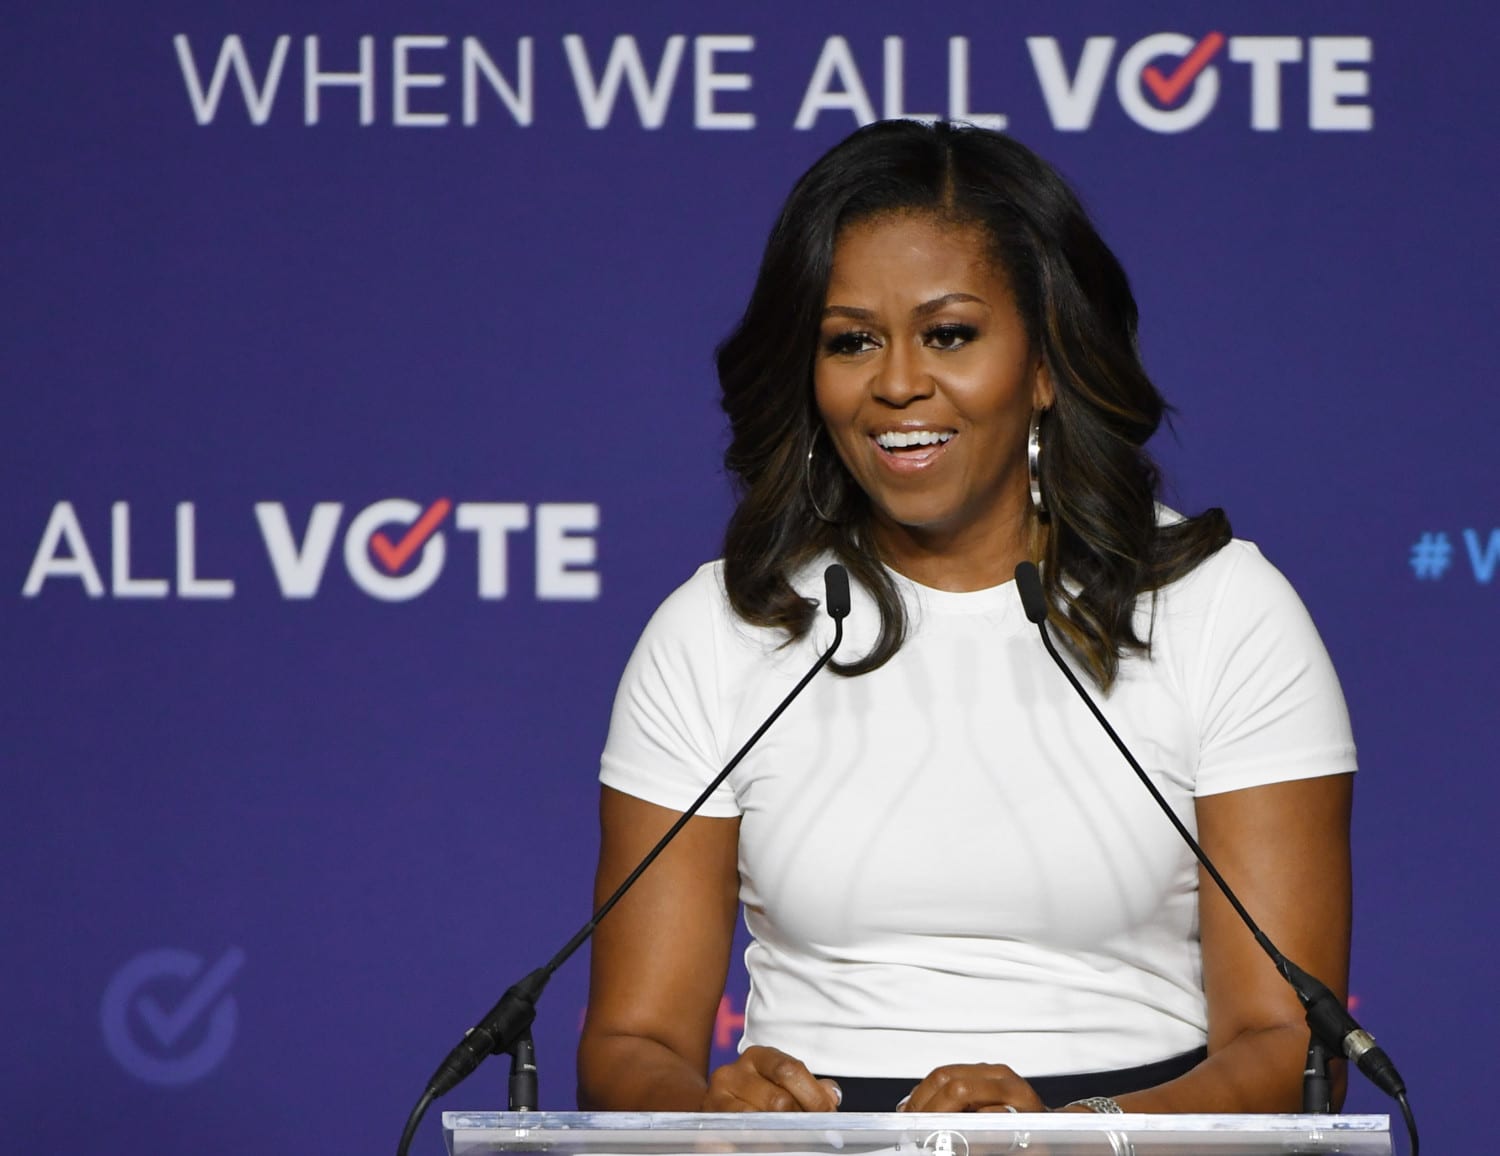 Michelle Obama Attends 'When We All Vote' Rally In Las Vegas